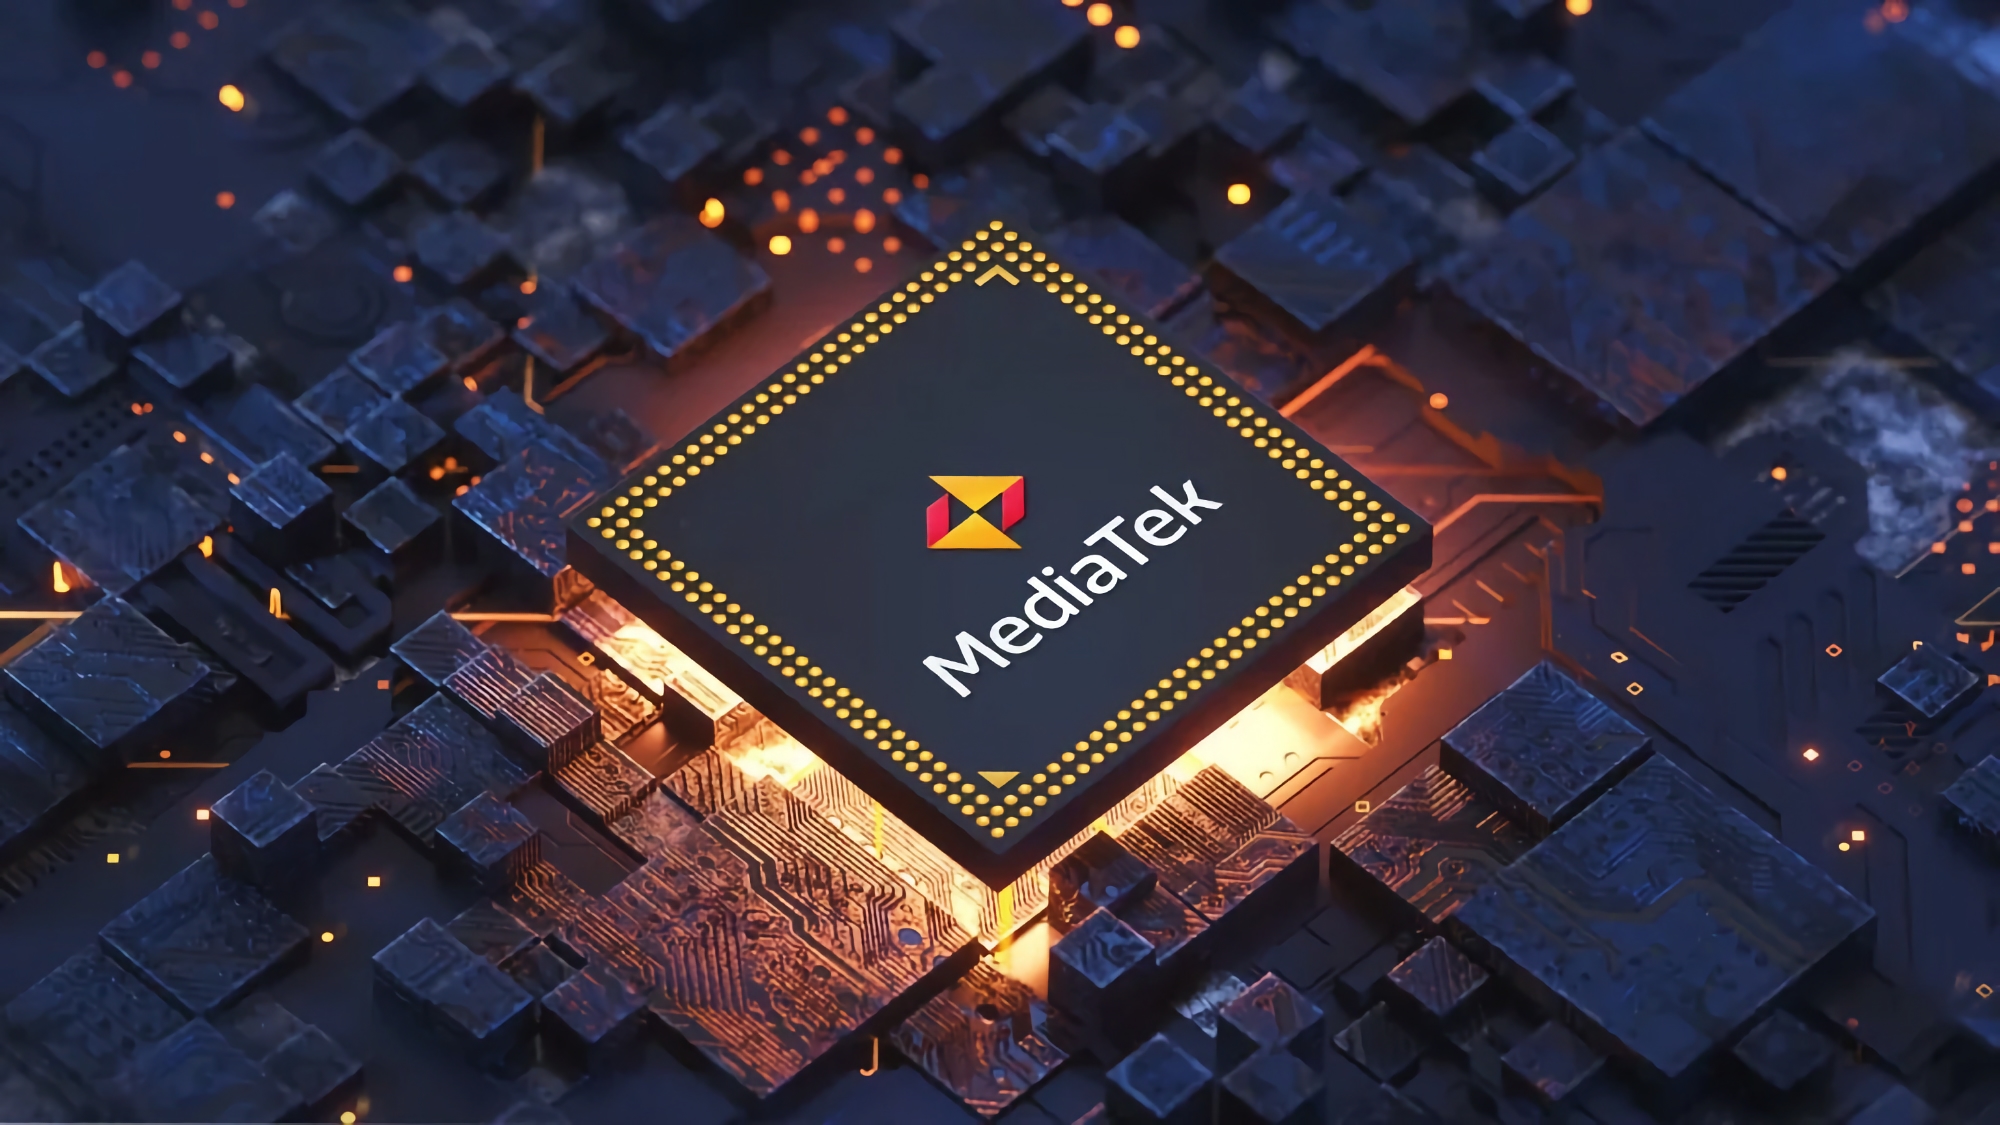 Insider: MediaTek's next flagship chip will be called Dimensity 9300 and will be built on new TSMC process technology